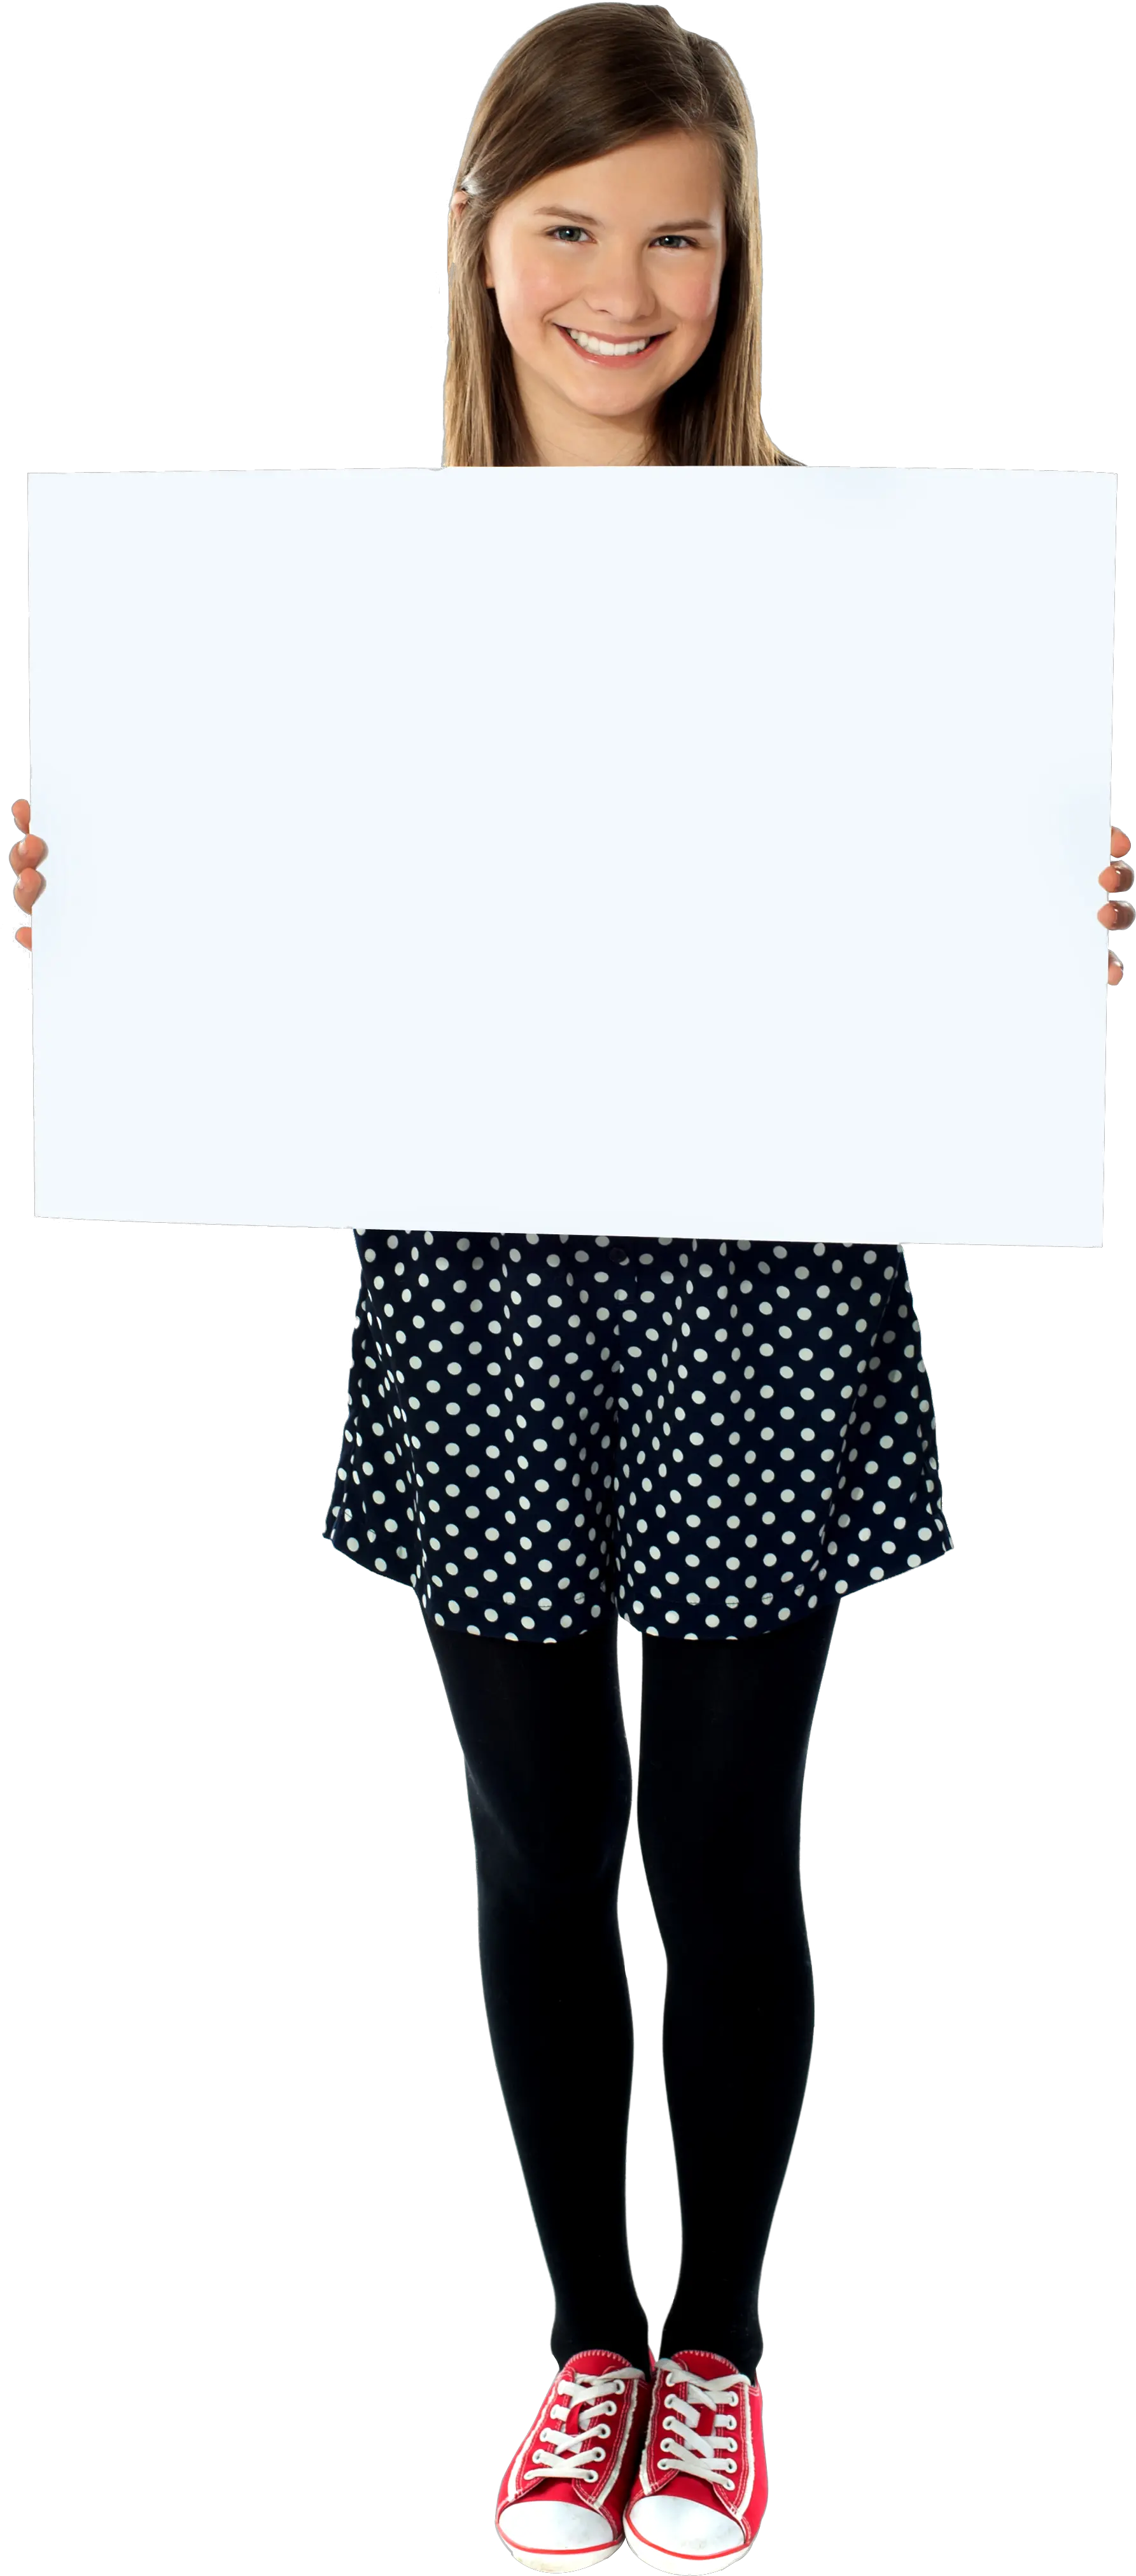 Download Girl Holding Banner Png Image For Free Person Holding A Poster Banner Png